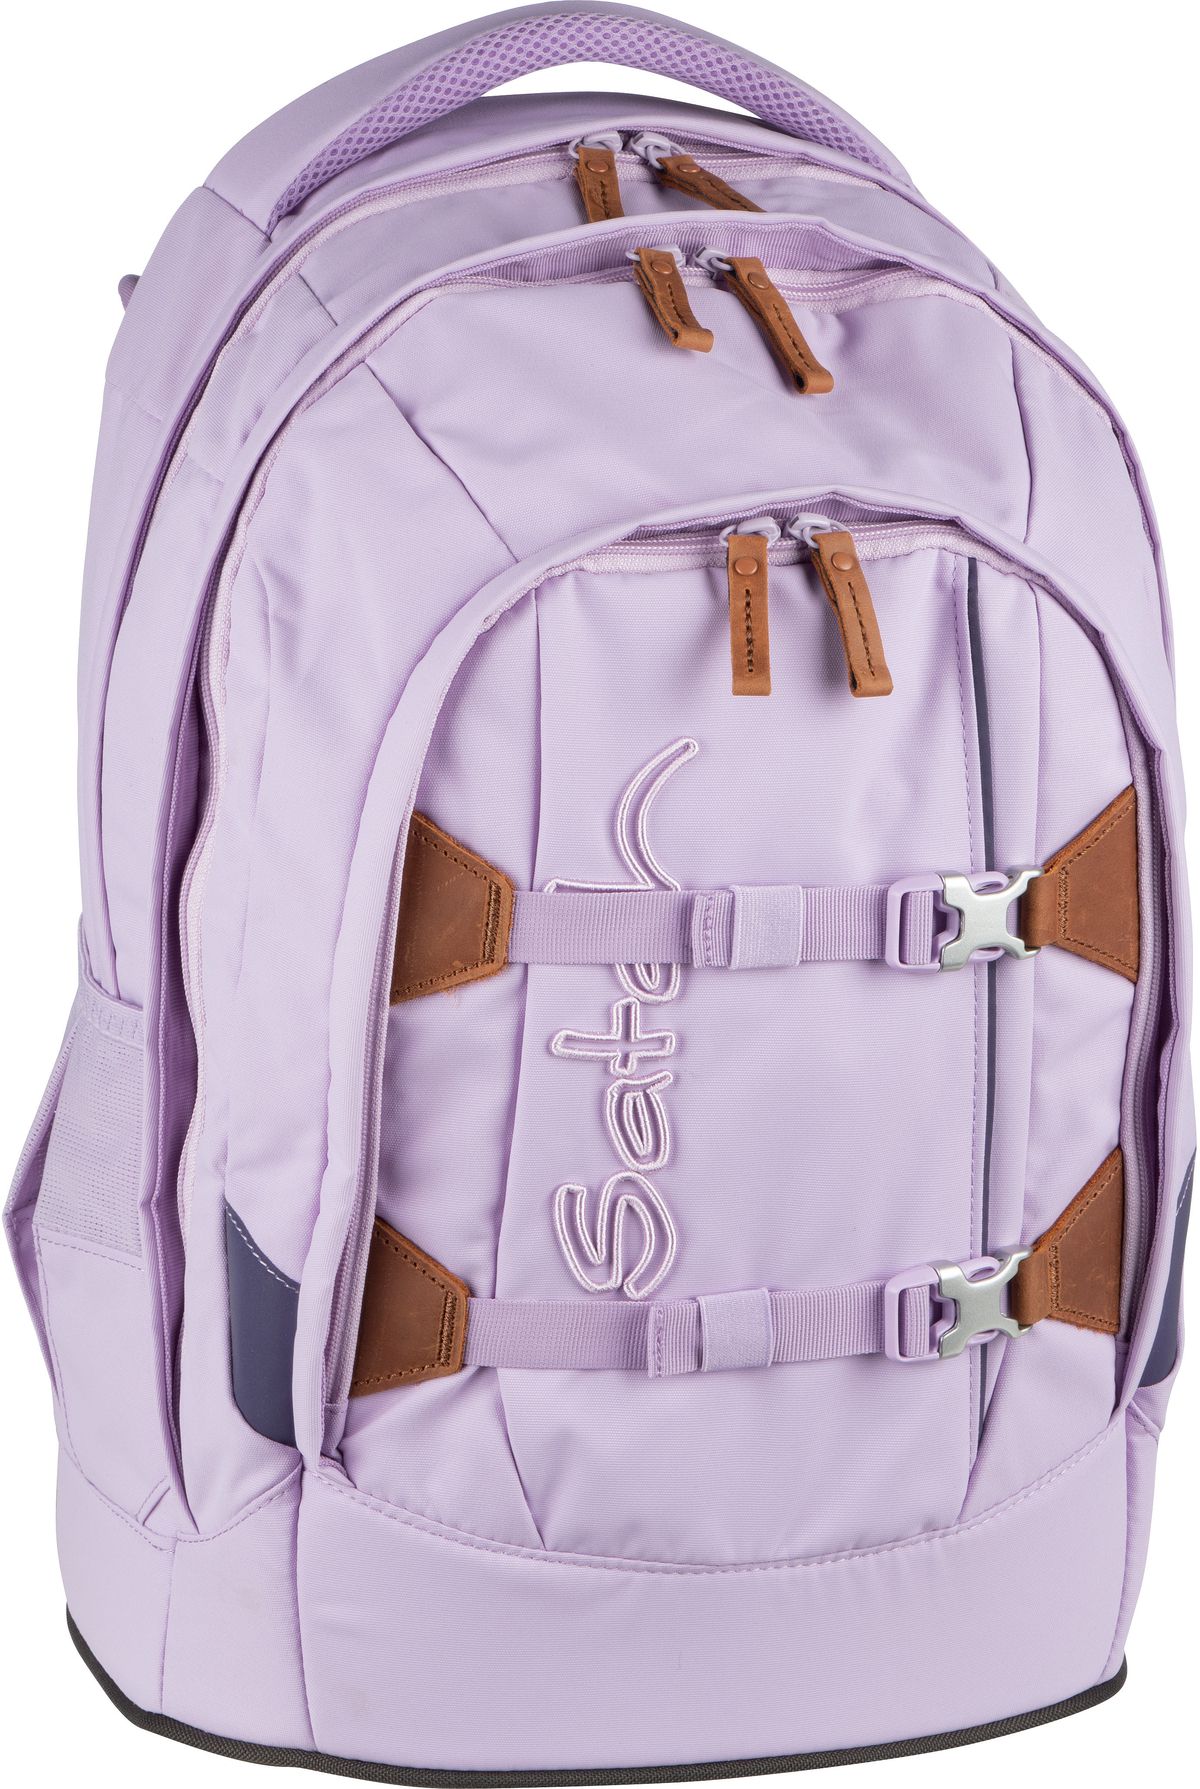 satch satch pack Nordic Edition - Nordic Purple